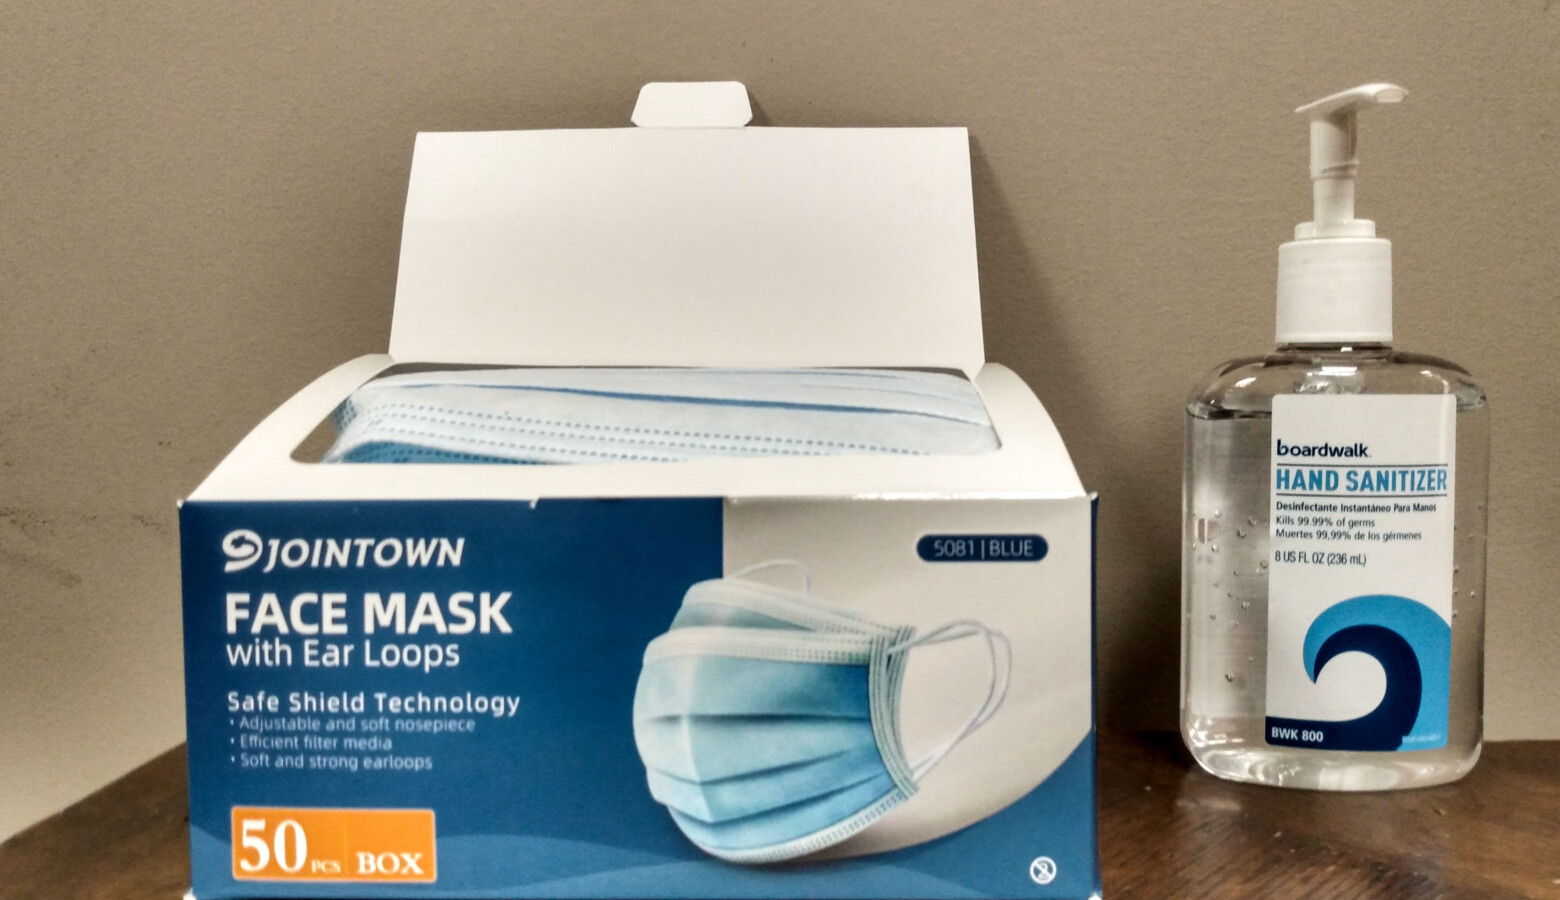 Many businesses are offering hand sanitizer and disposable face masks at their entrances. (Lauren Chapman/IPB News)